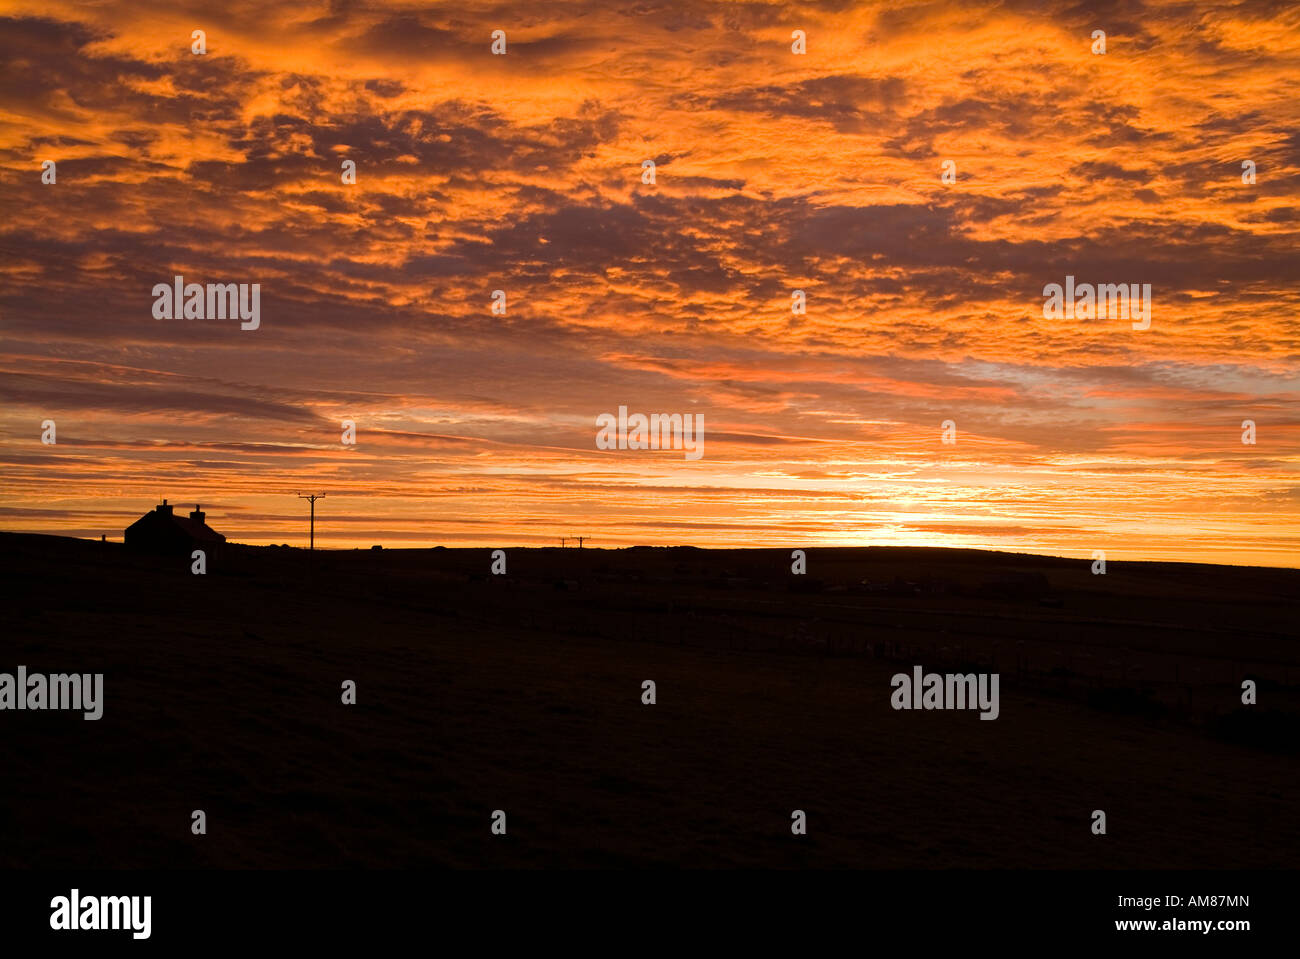 dh  ORPHIR ORKNEY Cottage silhouette and cloudscape sunset sky scottish croft fiery dusk orange clear red clouds highlands house uk scotland Stock Photo